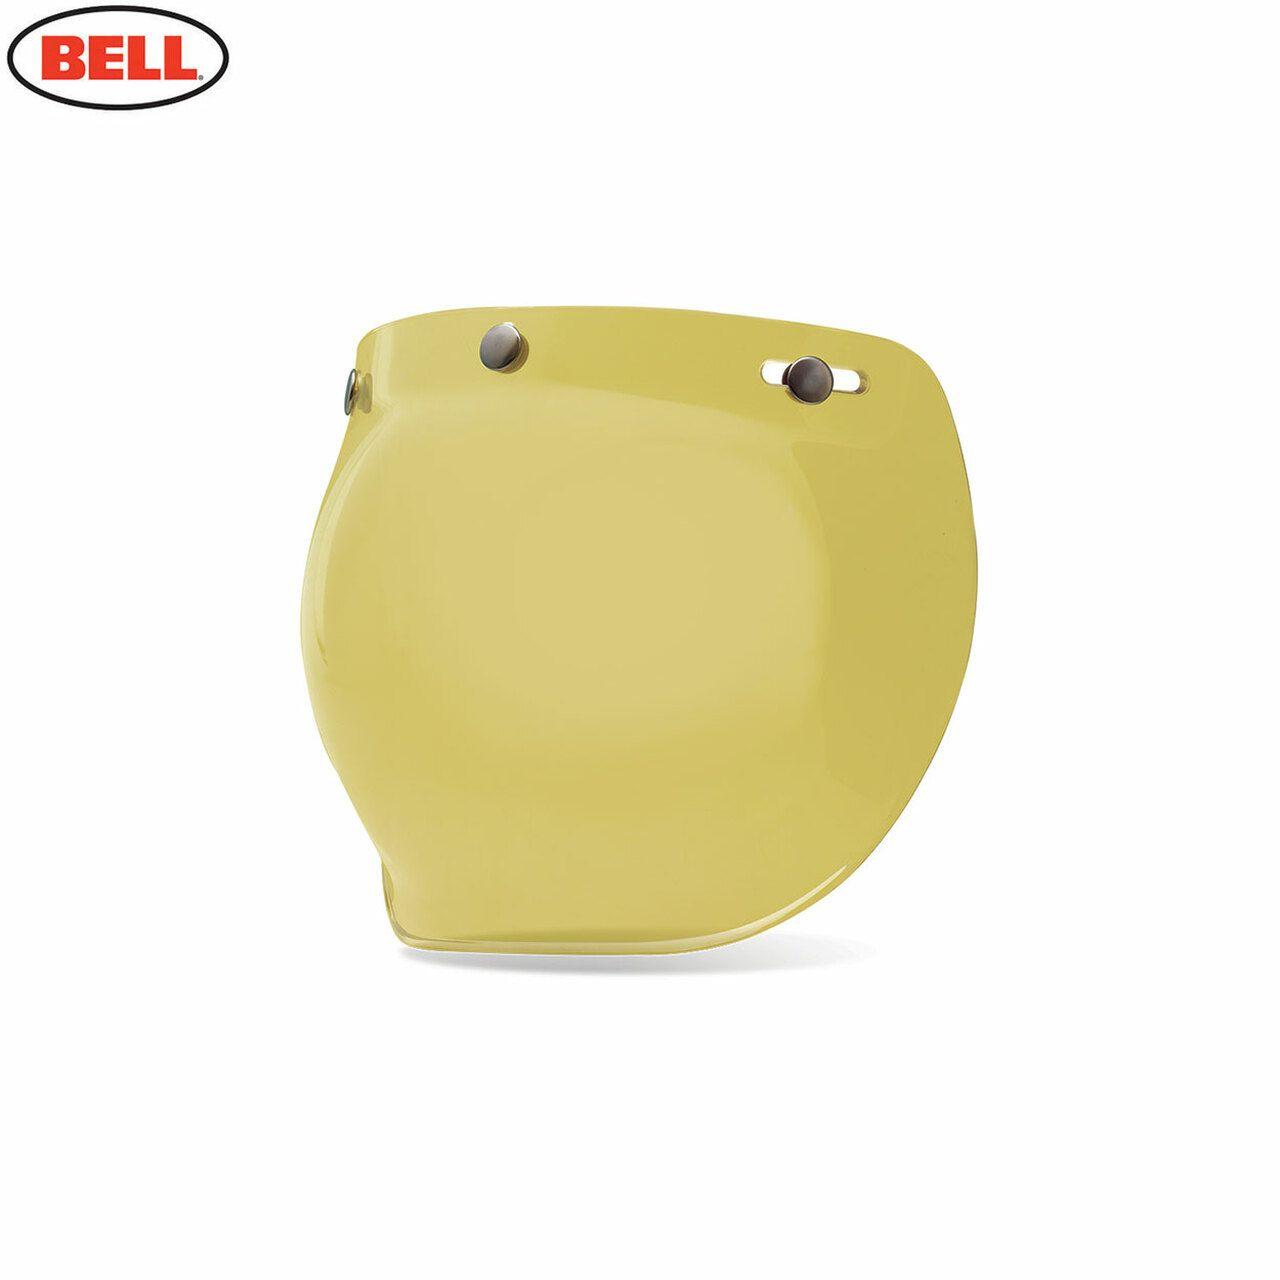 Bell Replacement Custom 500 3-Snap Bubble Shield Amber Yellow